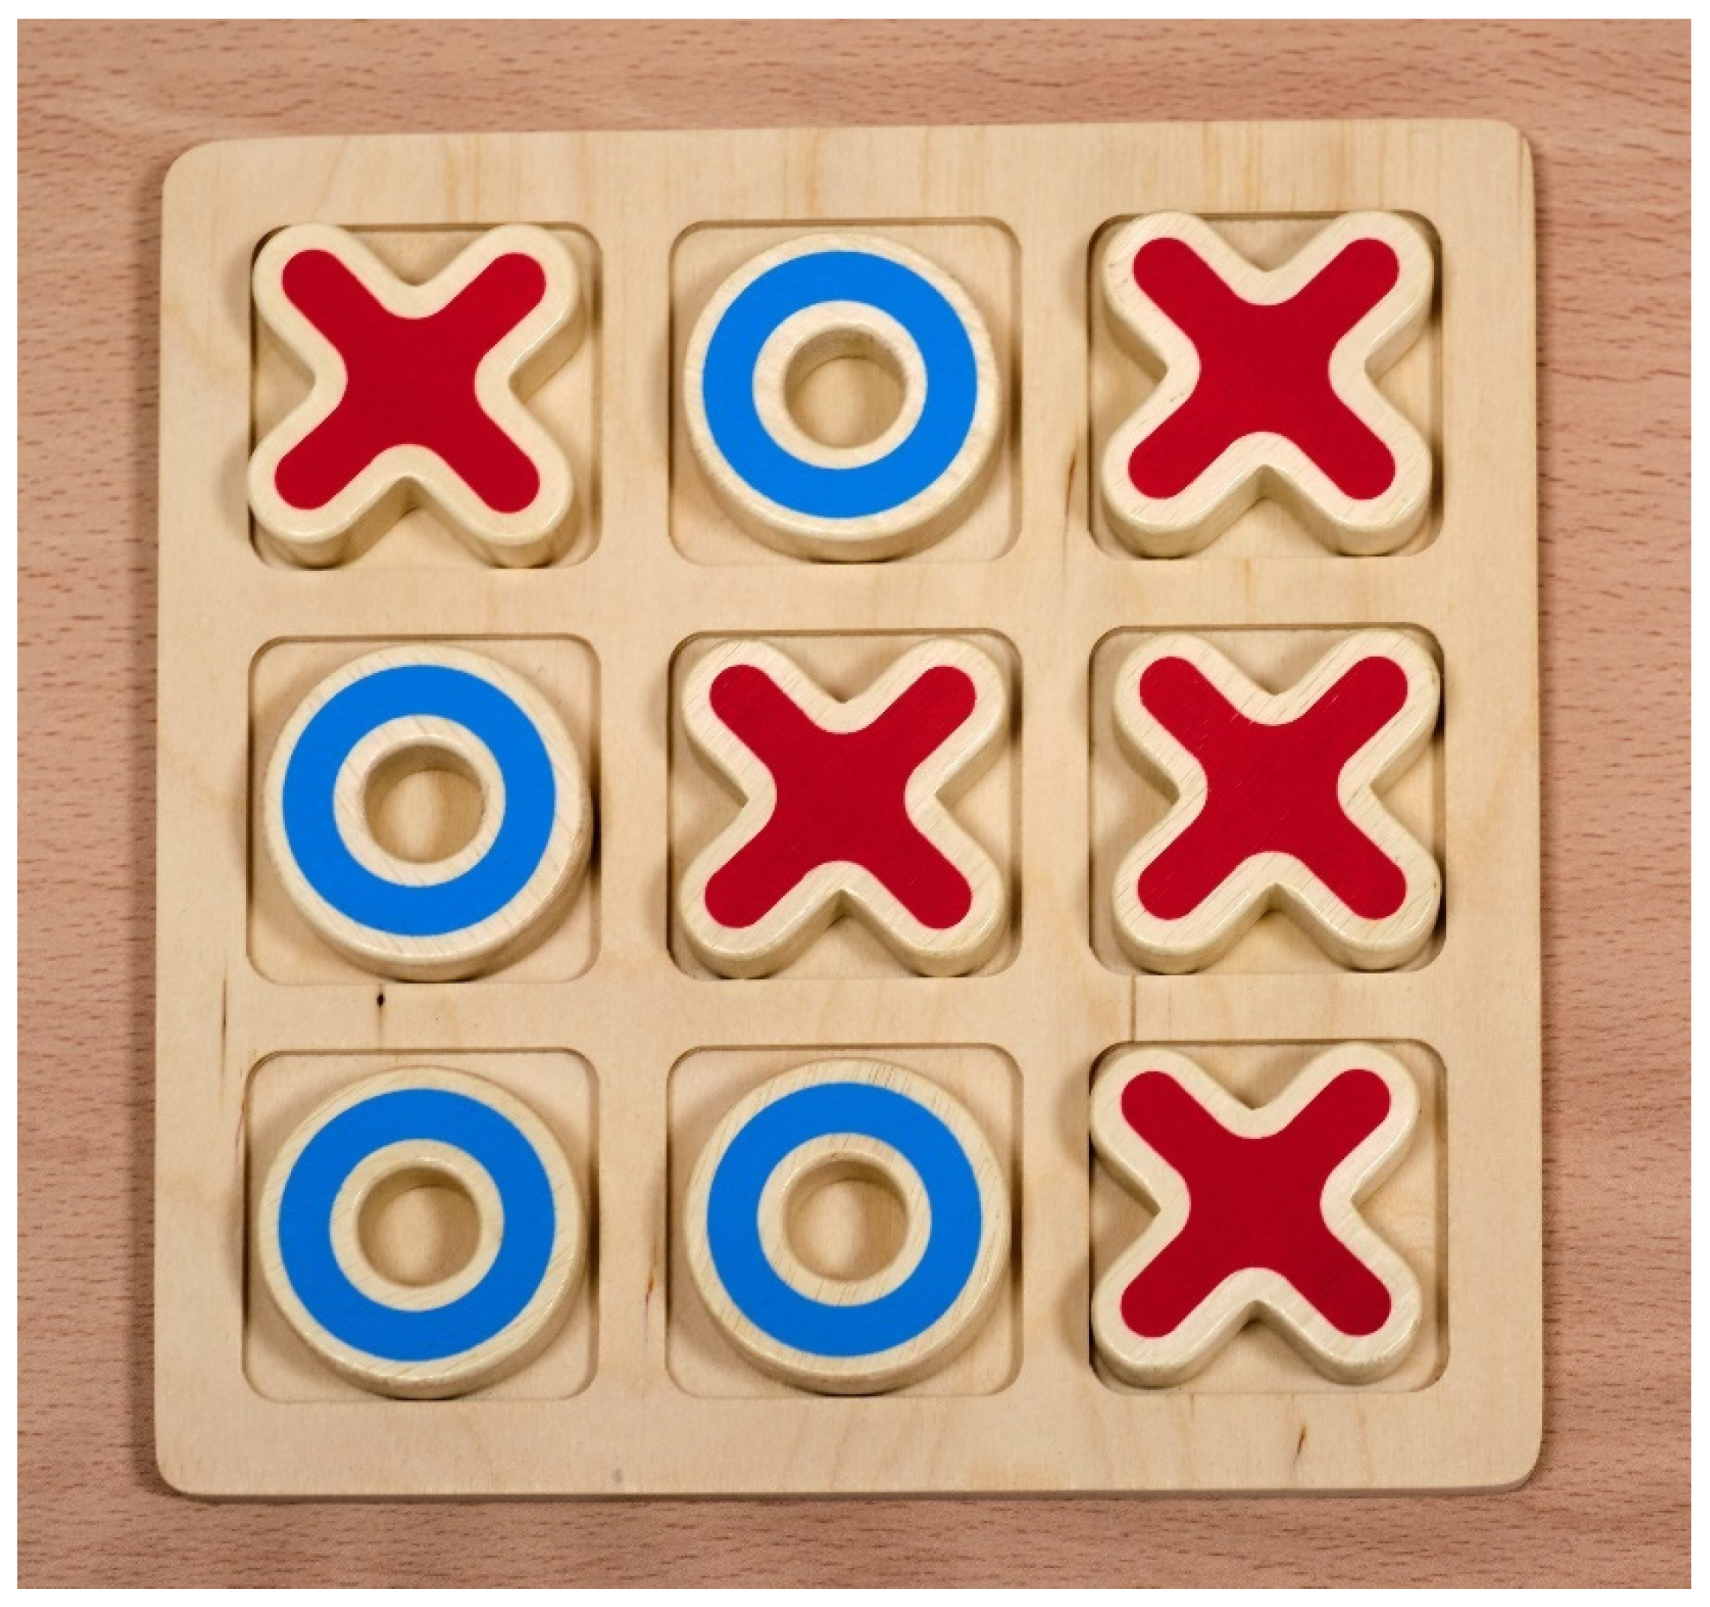 WE Games Tic-tac-toe Wooden Board Game – Wood Expressions